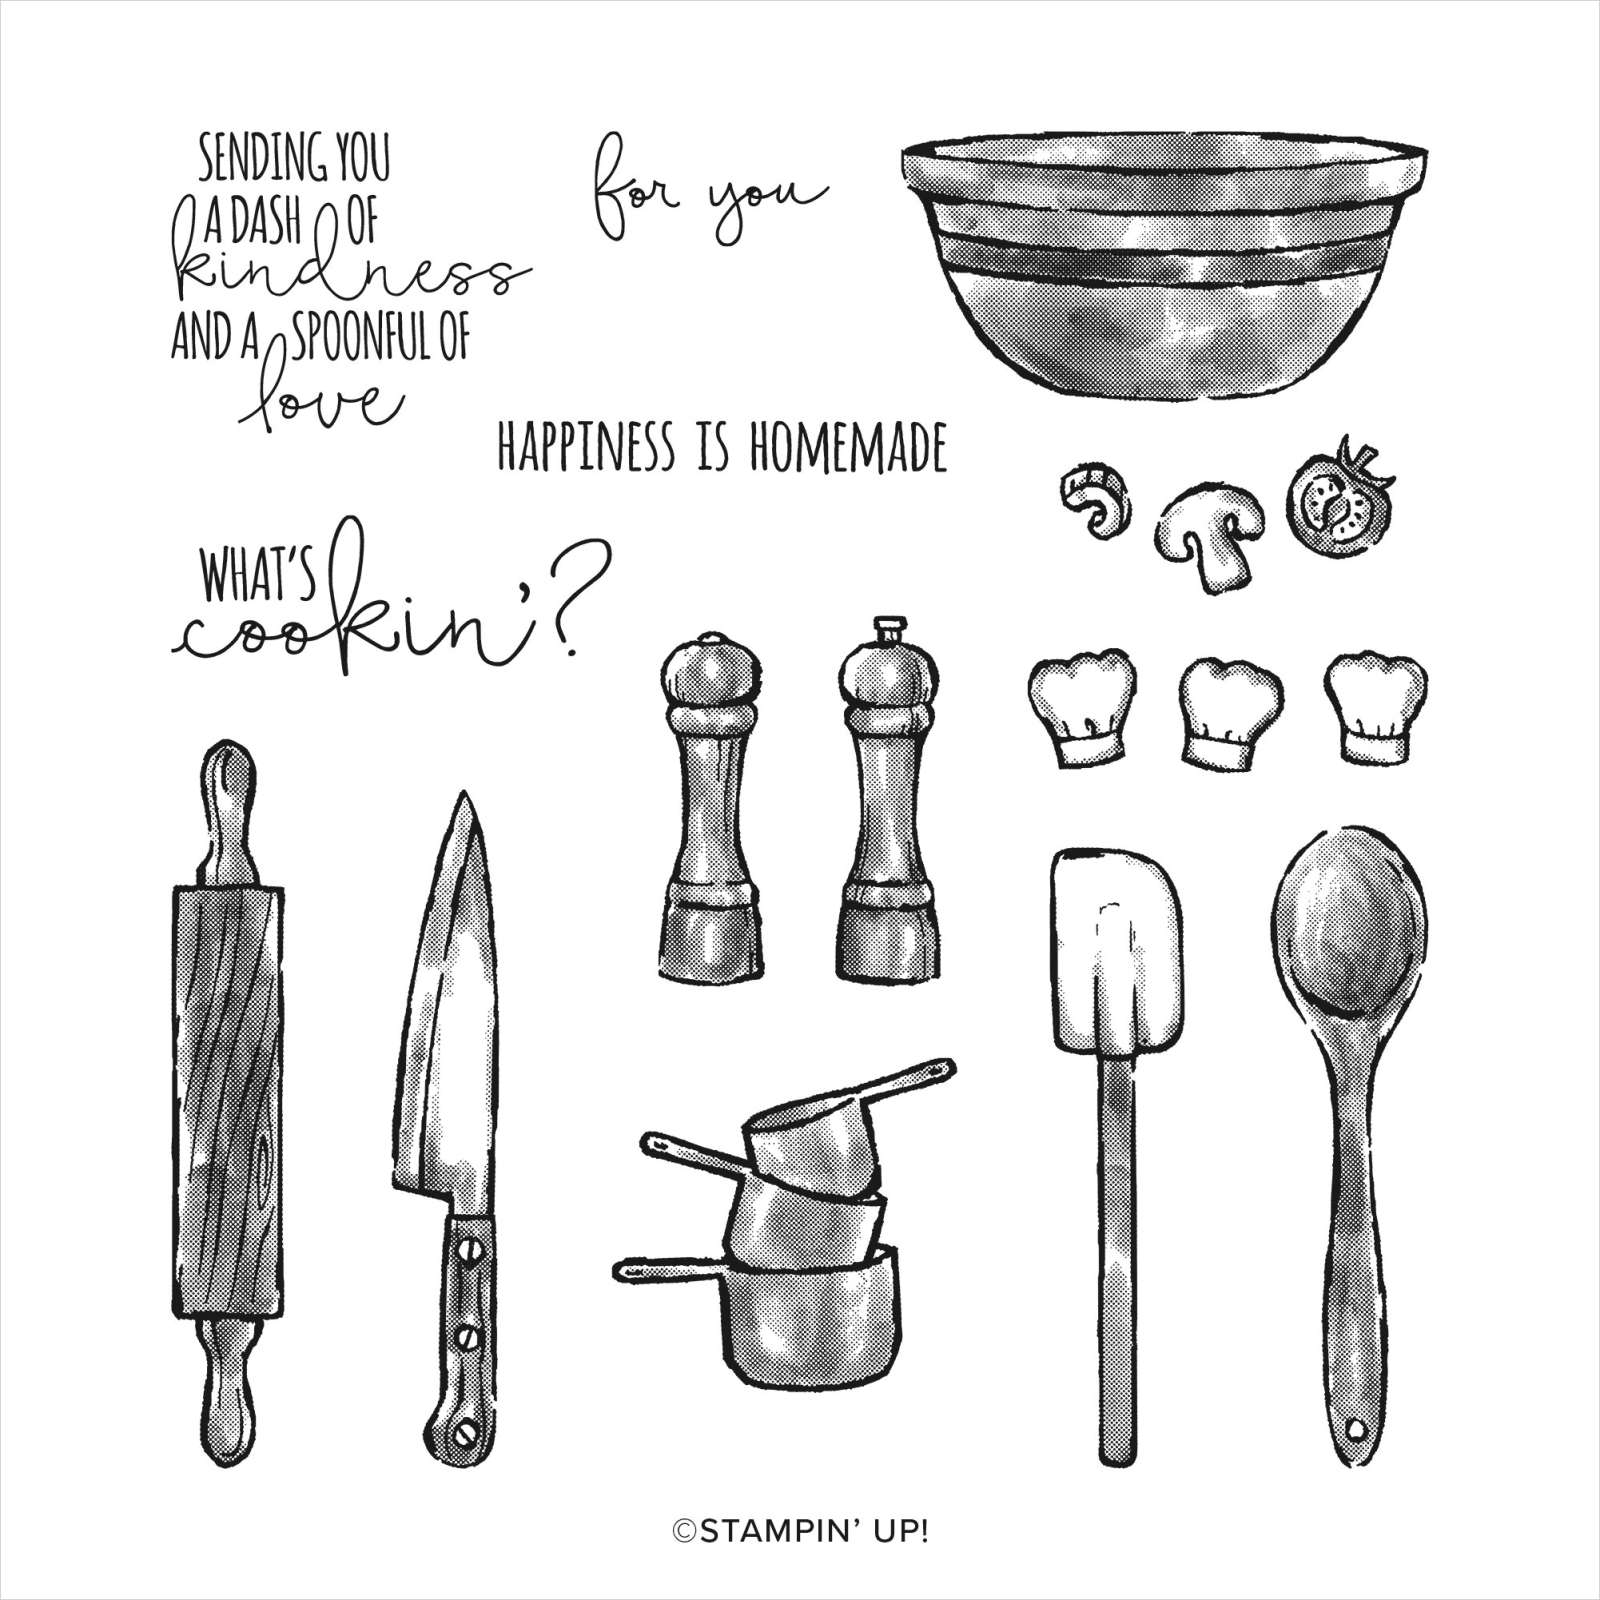 WHAT'S COOKIN' CLING STAMP SET